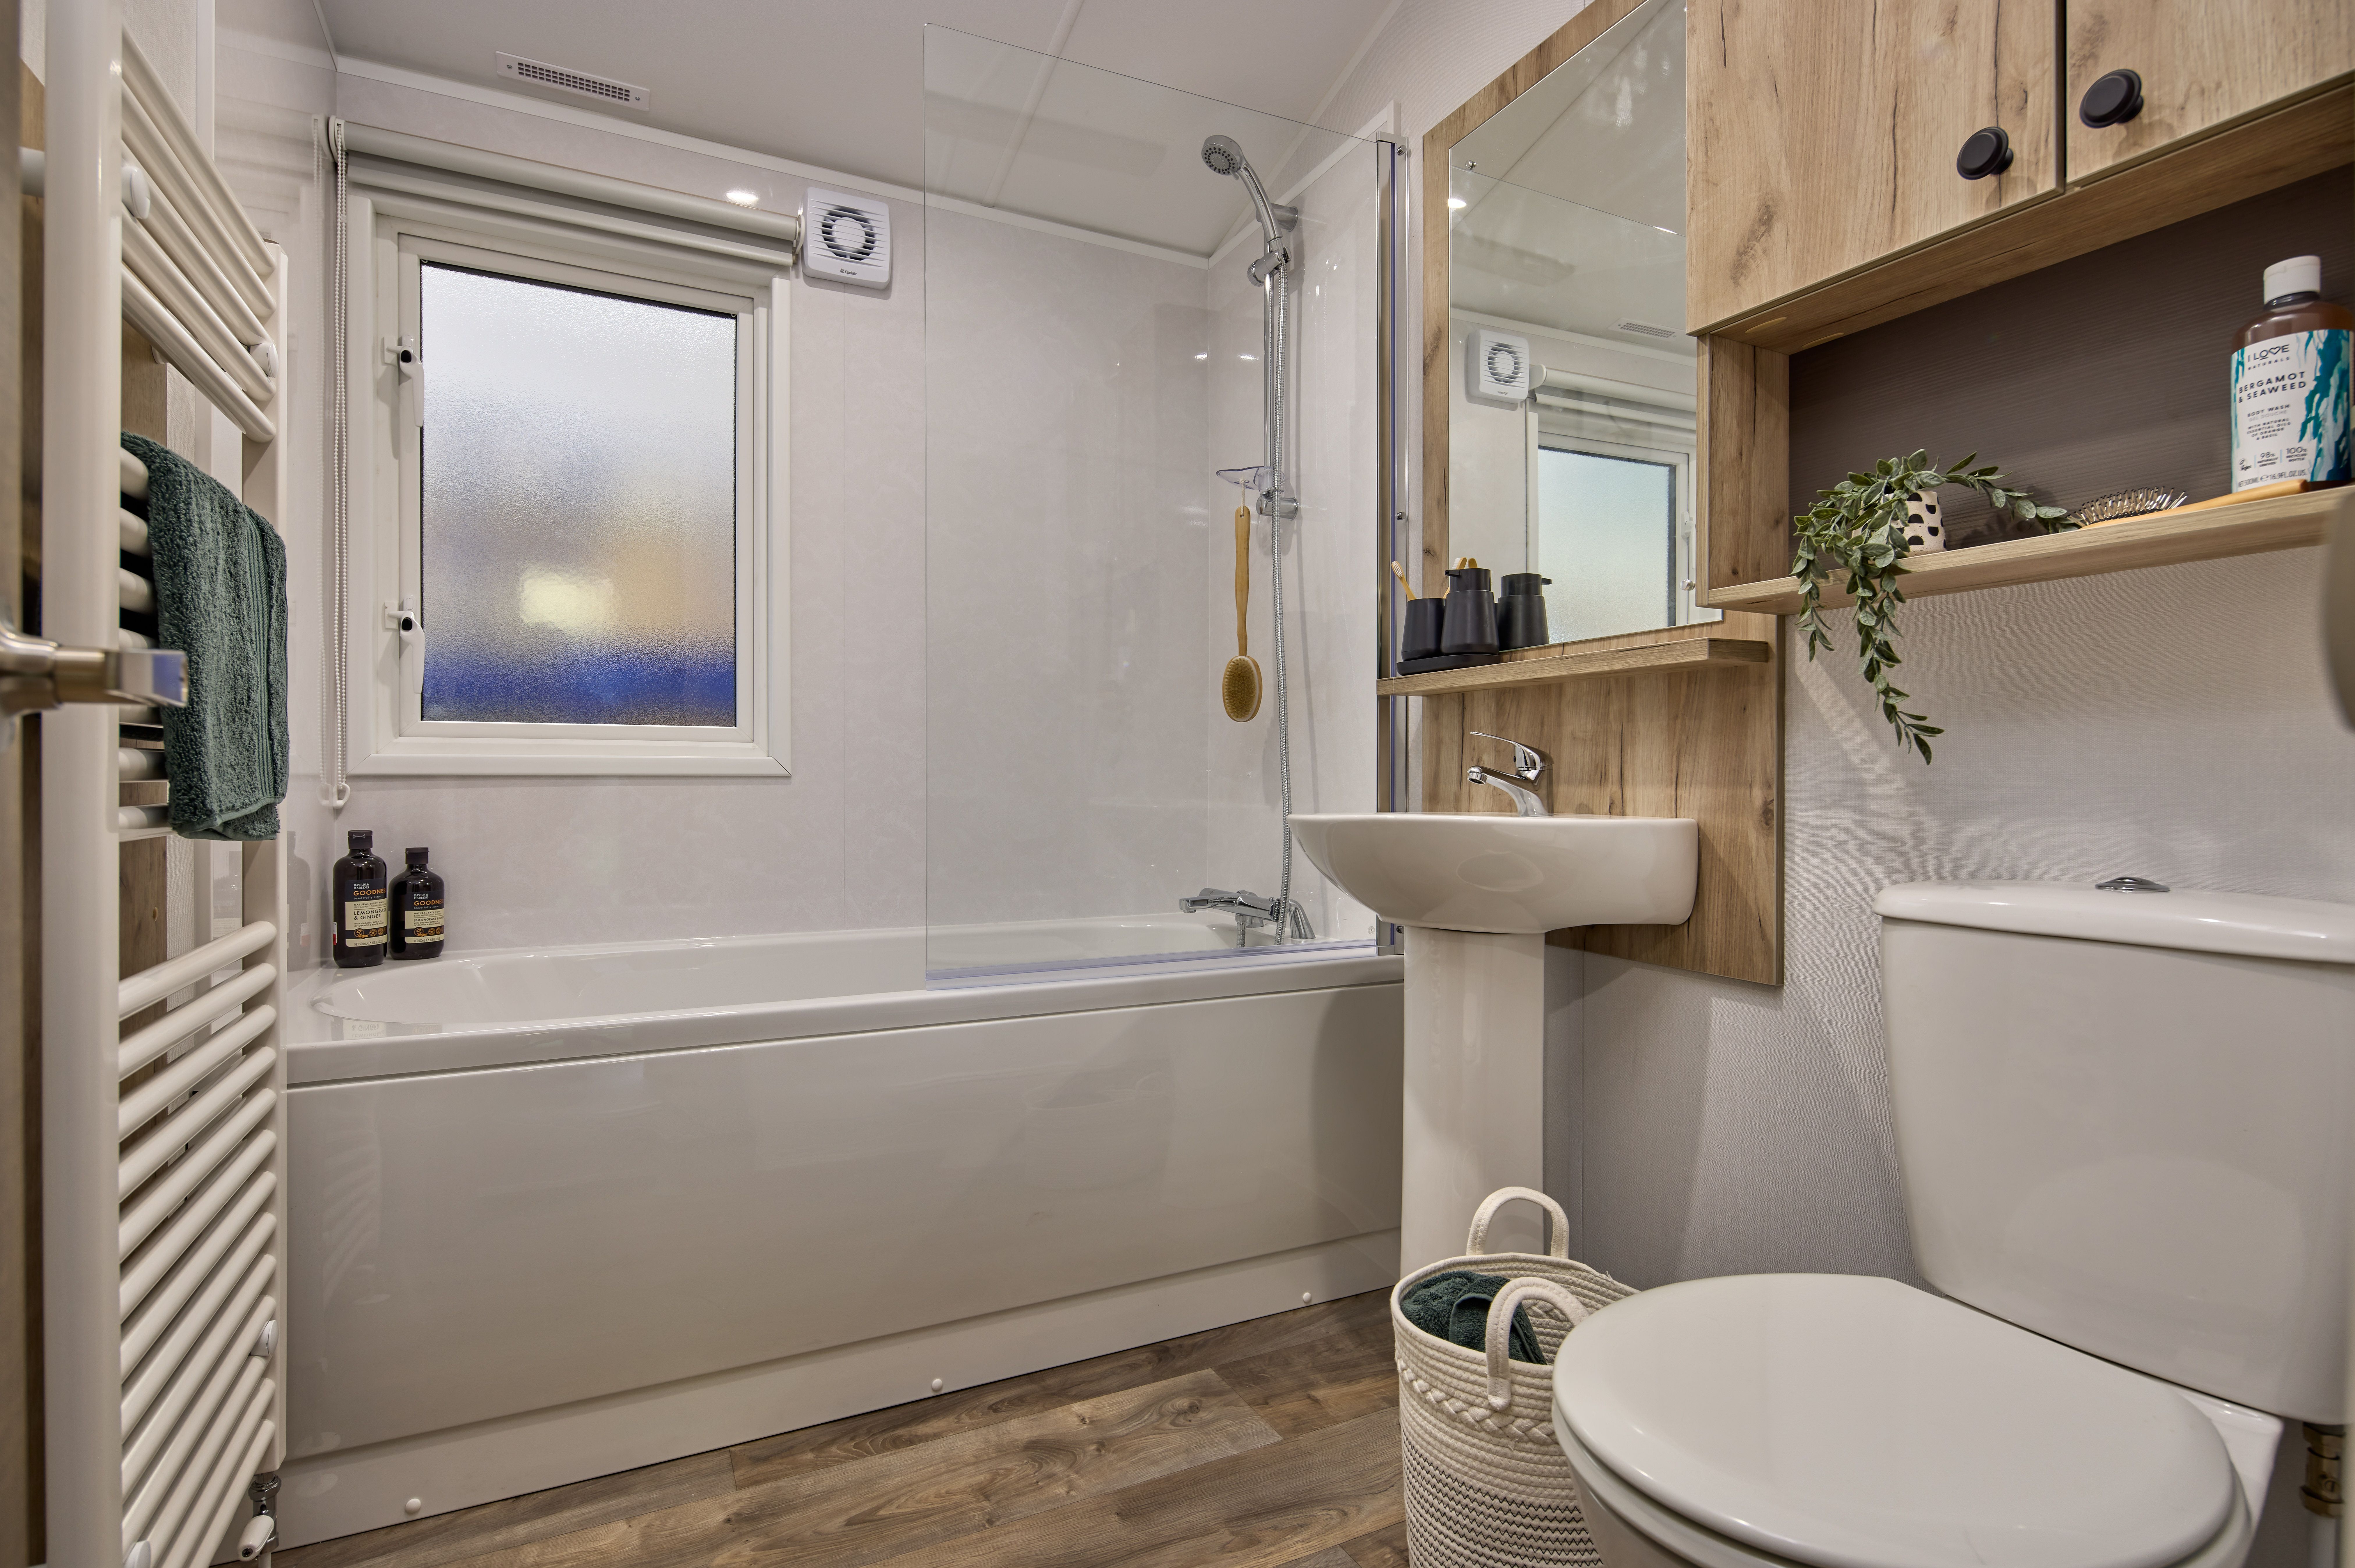 The bathroom in the Willerby Buxton holiday home. There is a large towel rail, shower over bath and big mirror. The white and wood colour scheme makes the most of the light from the large window. 